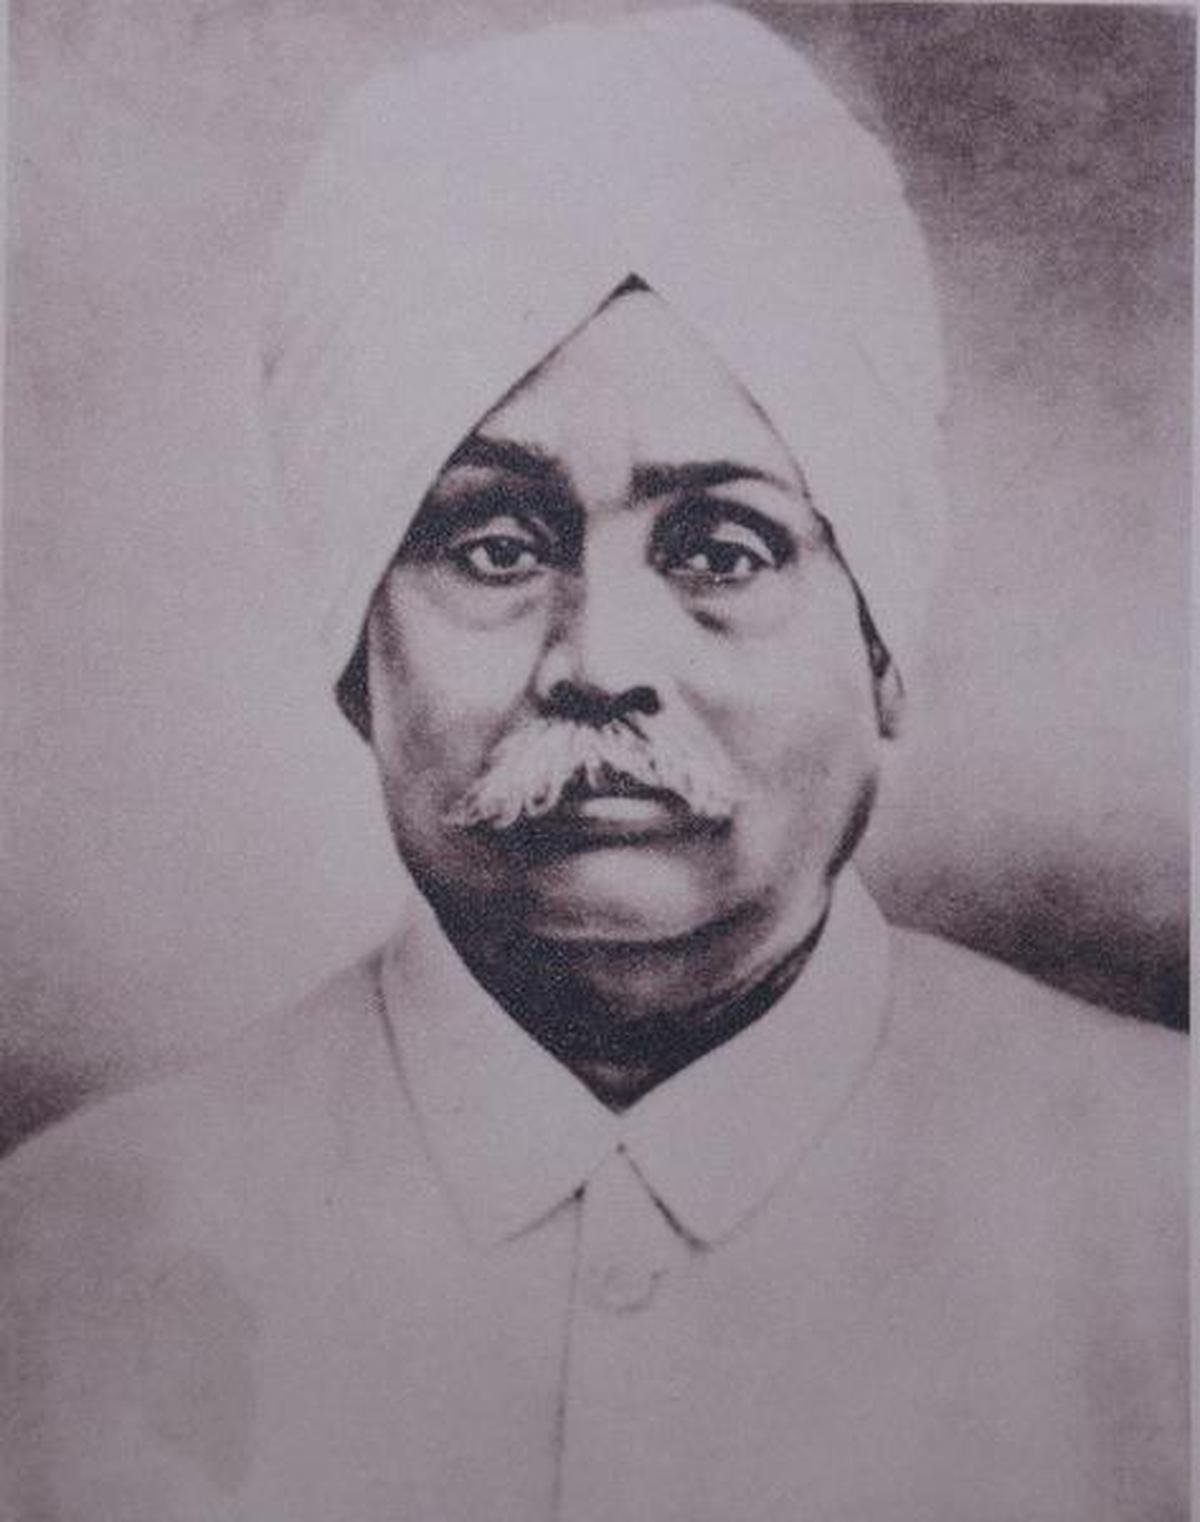 How Well Do You Know Lala Lajpat Rai? - Quiz, Trivia & Questions